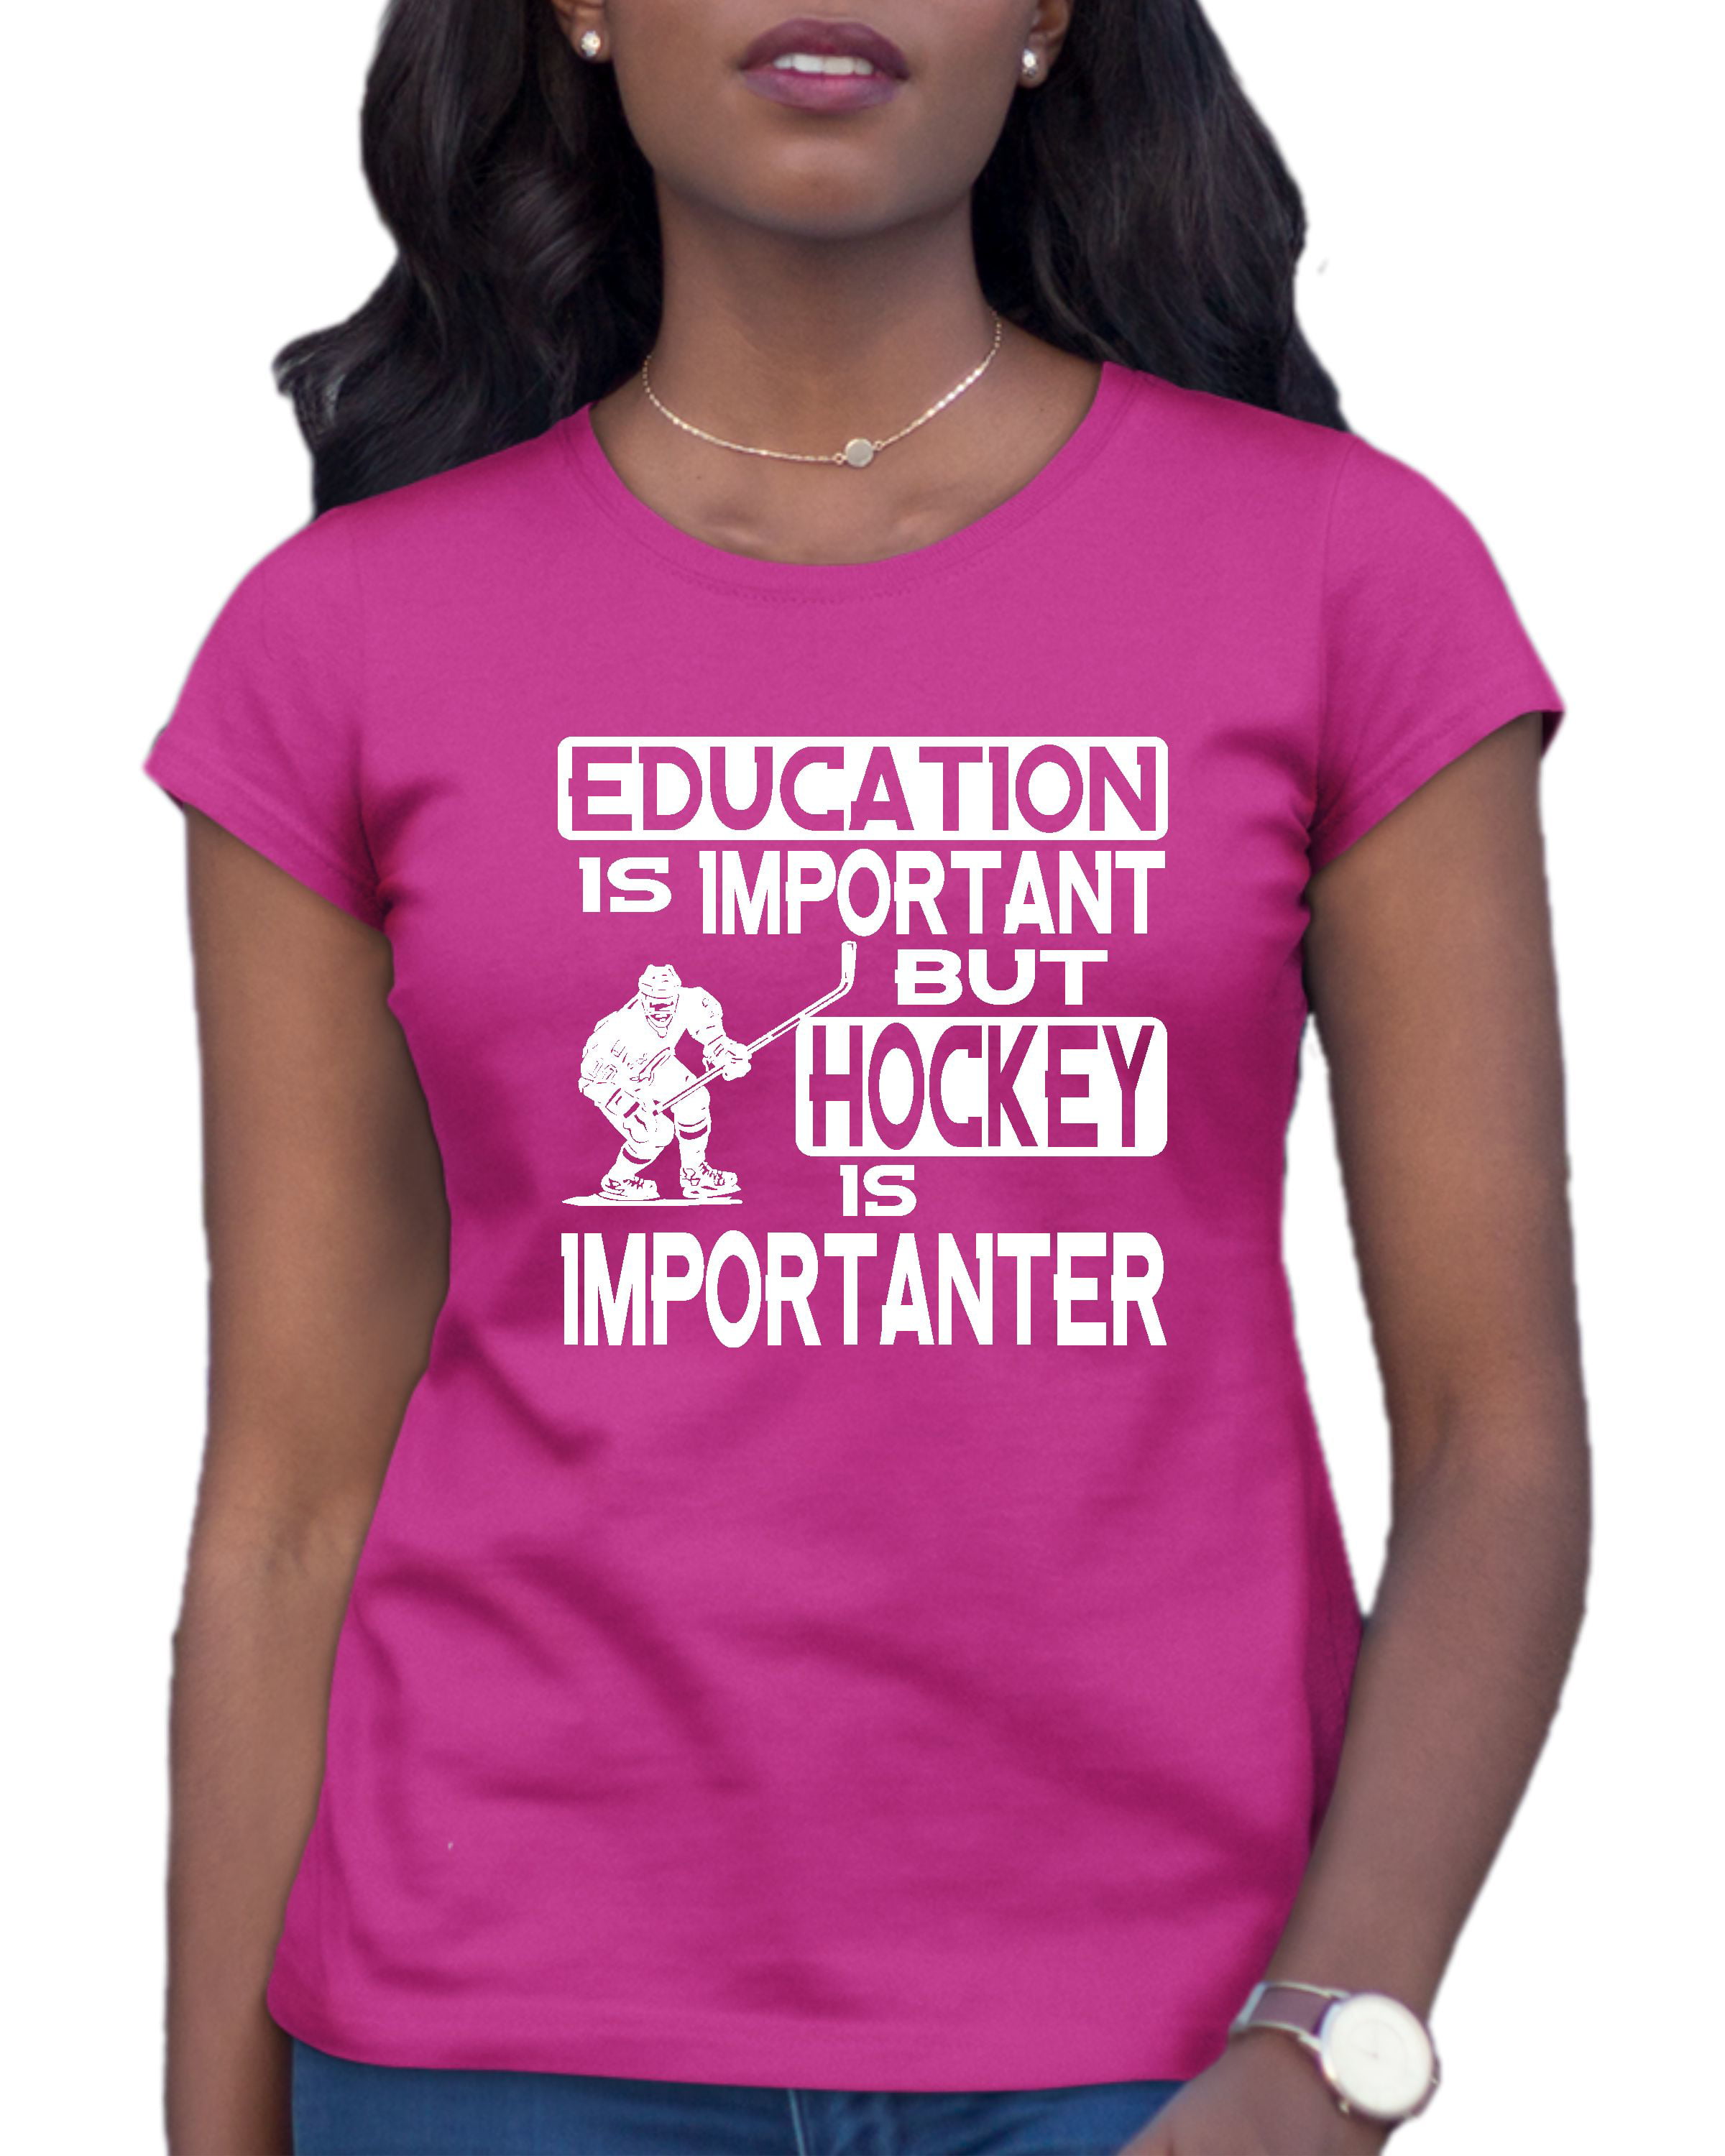 Education is Important but Theater Masks is Importanter Kids Tee Shirt 2T-XL 